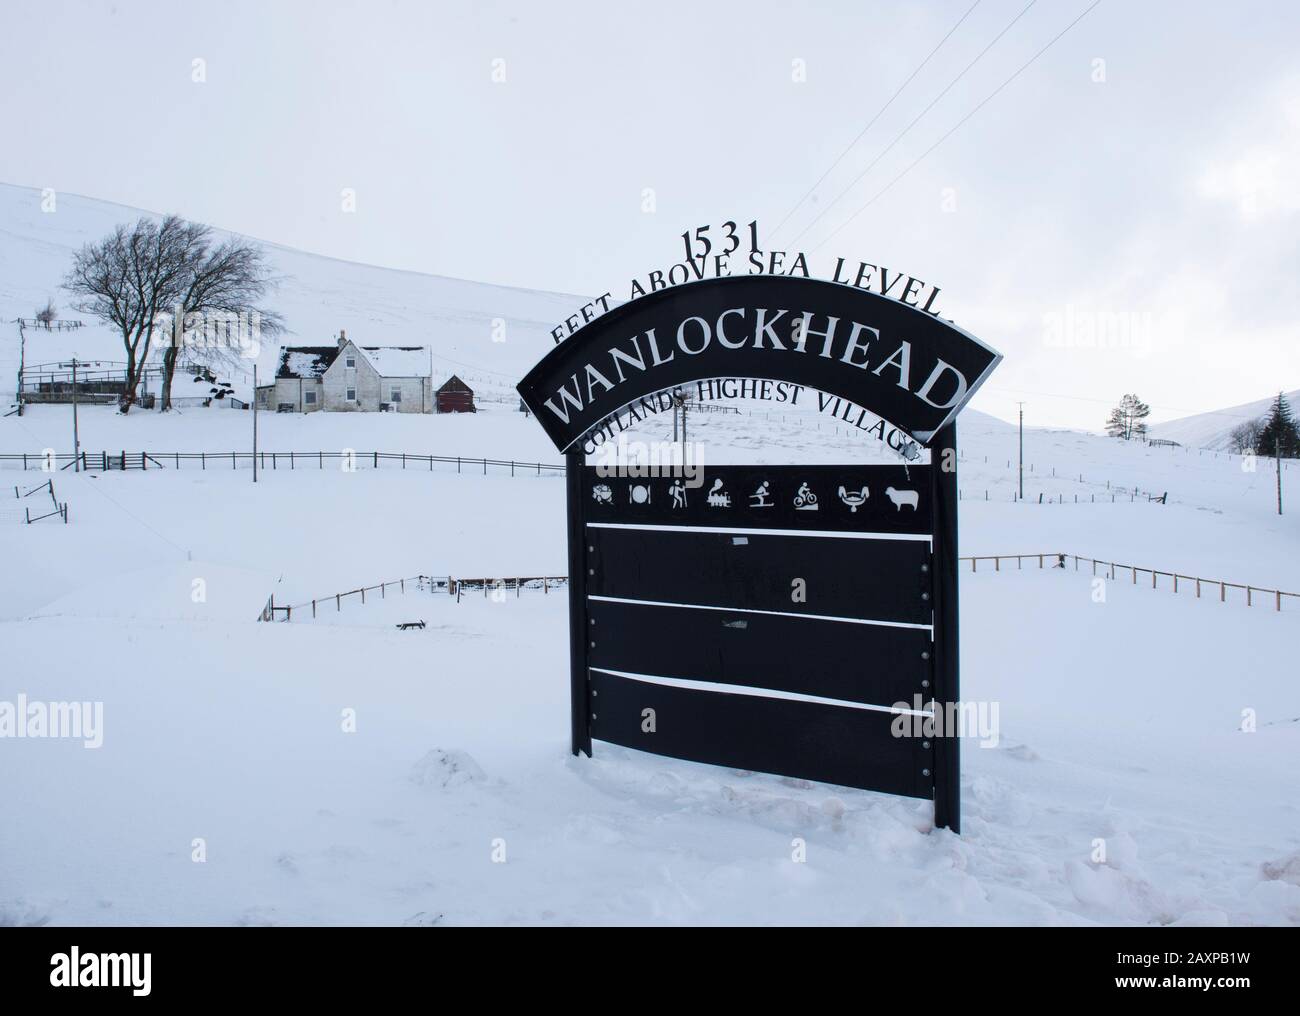 Wanlockhead, Dumfries & Galloway is Scotland's highest village at an altitude of 1531 feet above sea level. Stock Photo